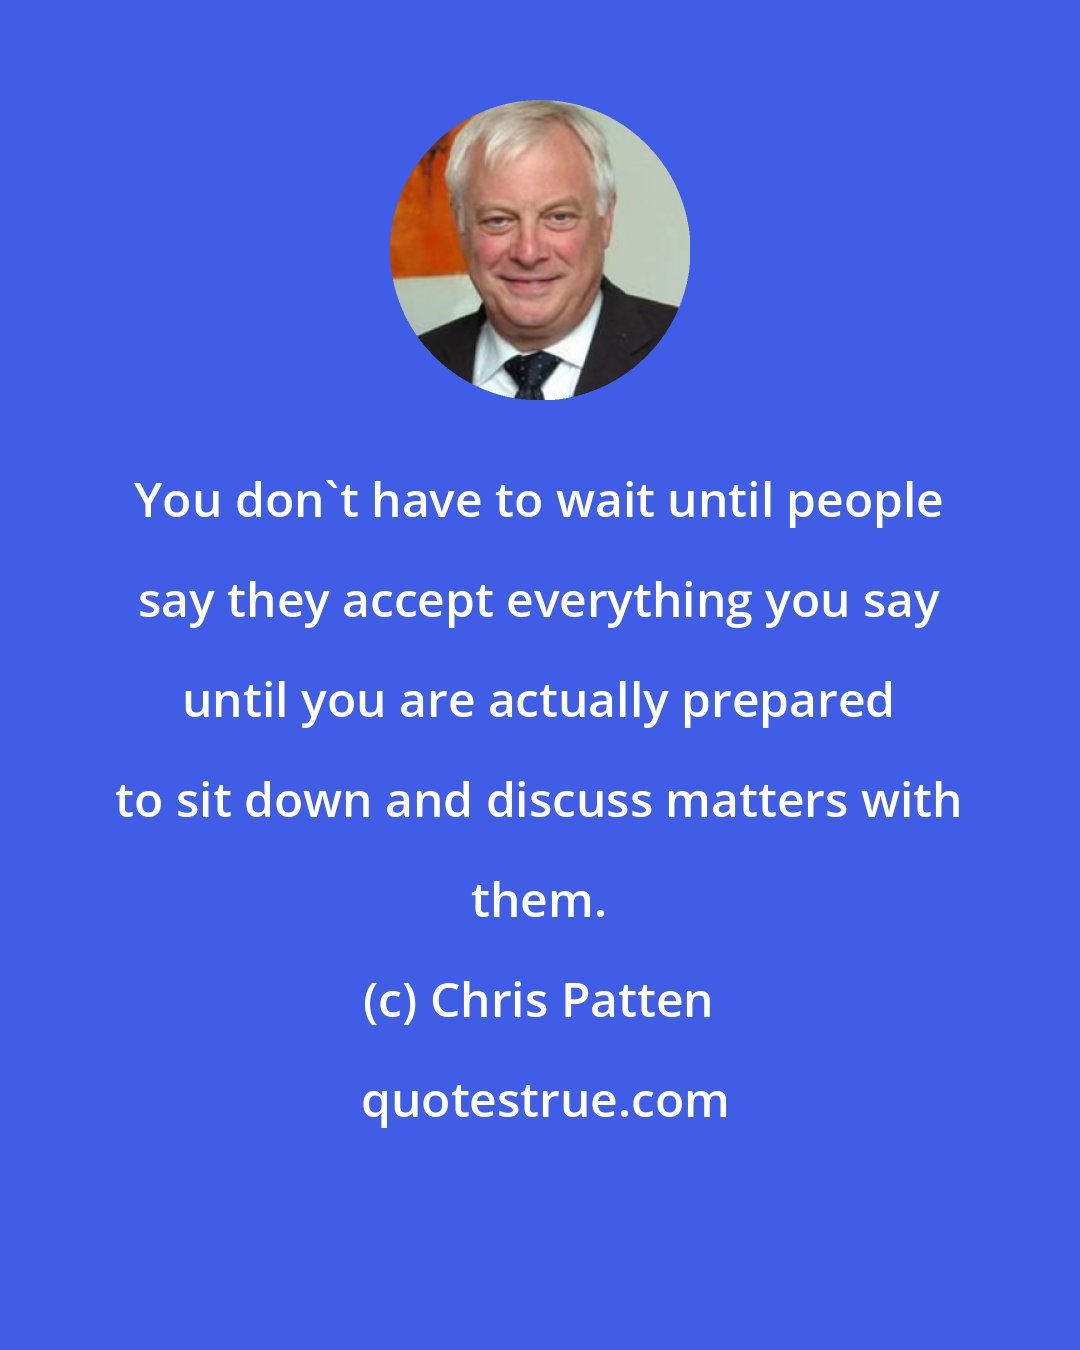 Chris Patten: You don't have to wait until people say they accept everything you say until you are actually prepared to sit down and discuss matters with them.